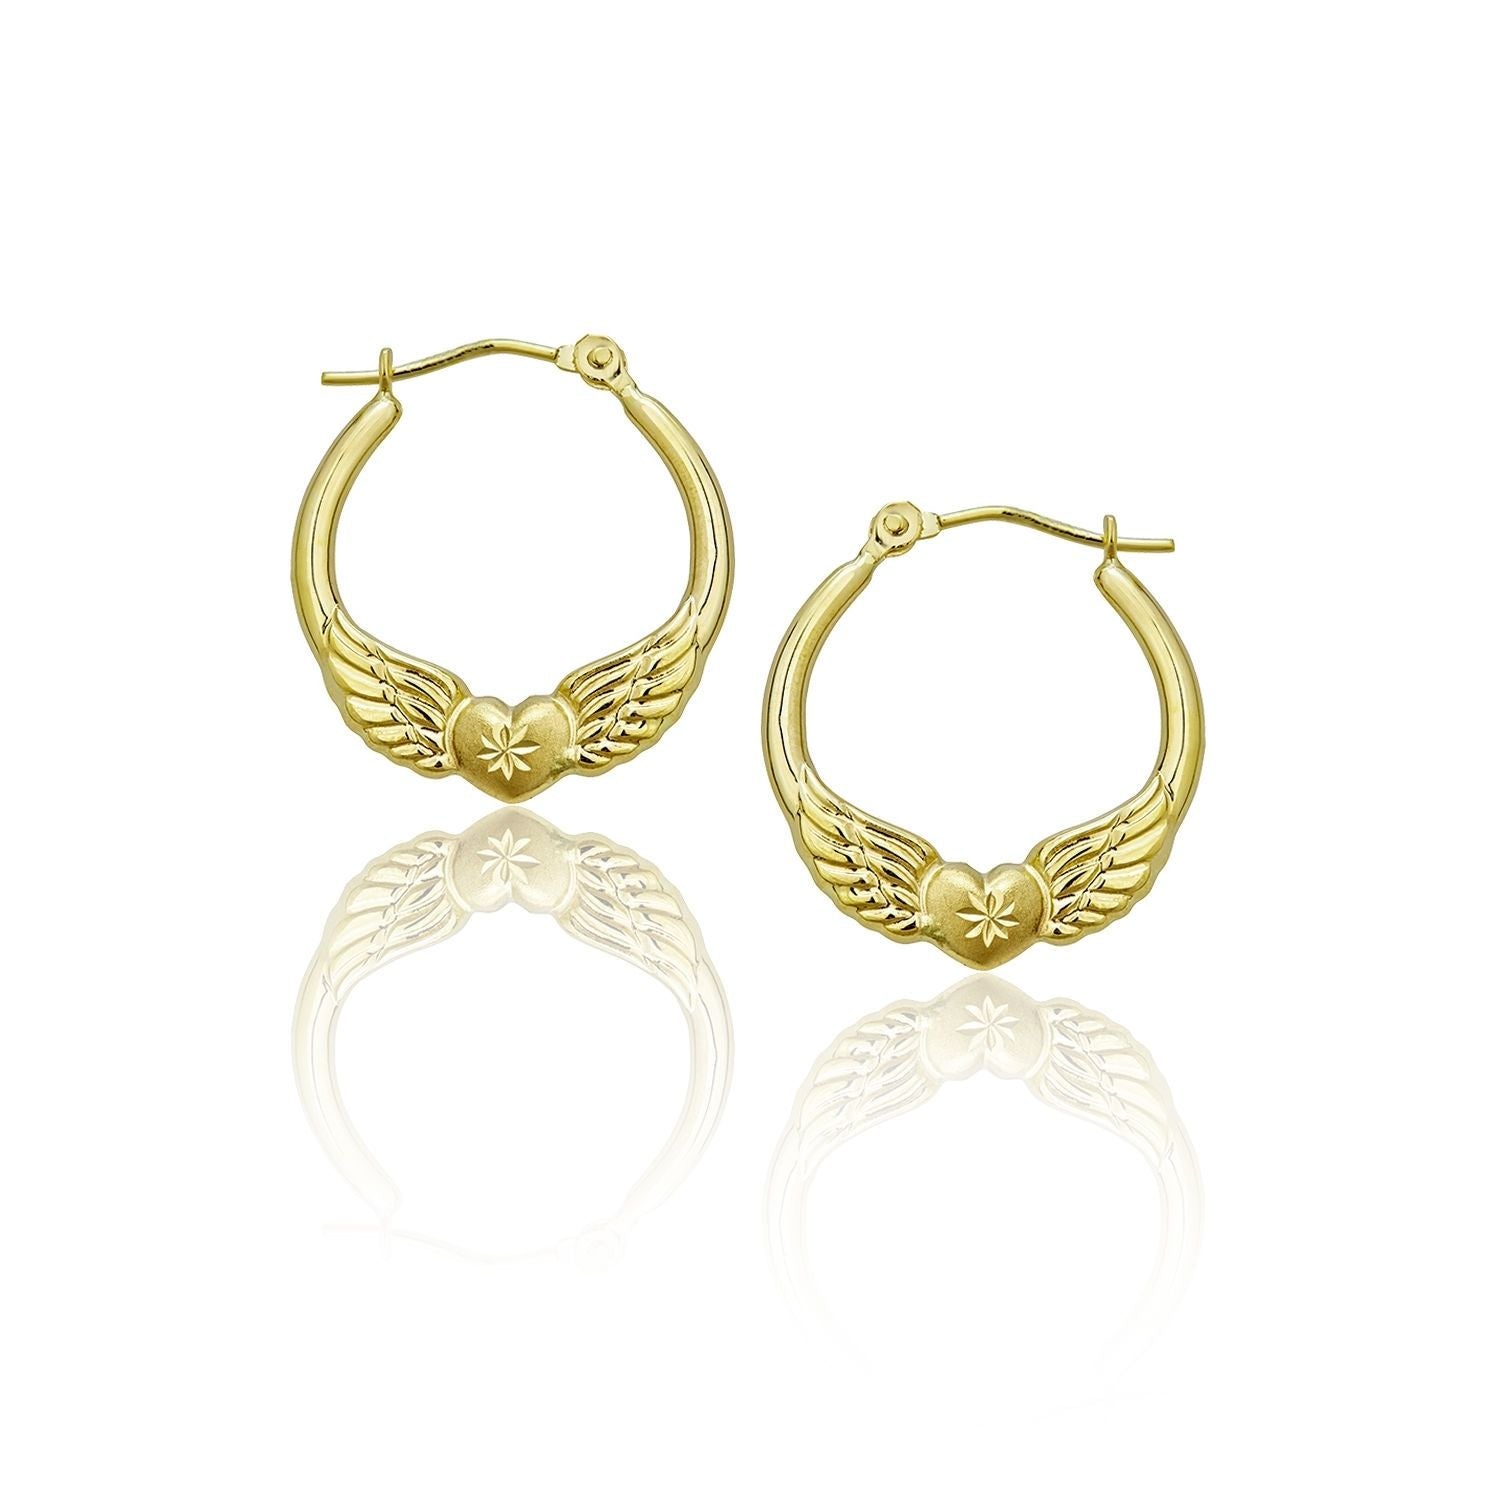 Studio One Love Mystic Owls SilverPlated Handmade Brass Hoop Earrings Buy  Studio One Love Mystic Owls SilverPlated Handmade Brass Hoop Earrings  Online at Best Price in India  Nykaa